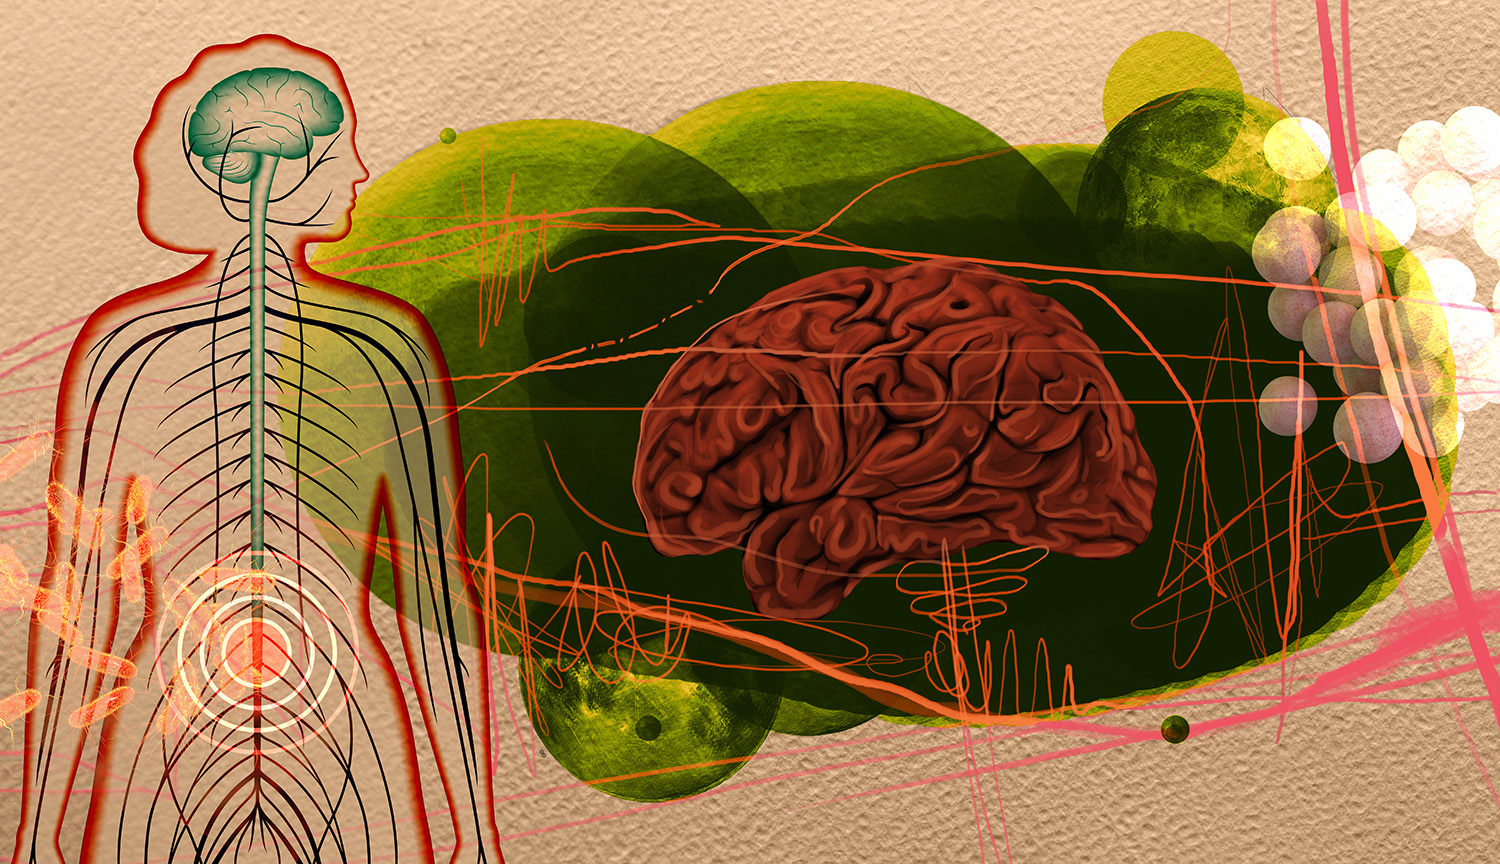 Collage depicts microbes, the brain, the human body and nerve cells.